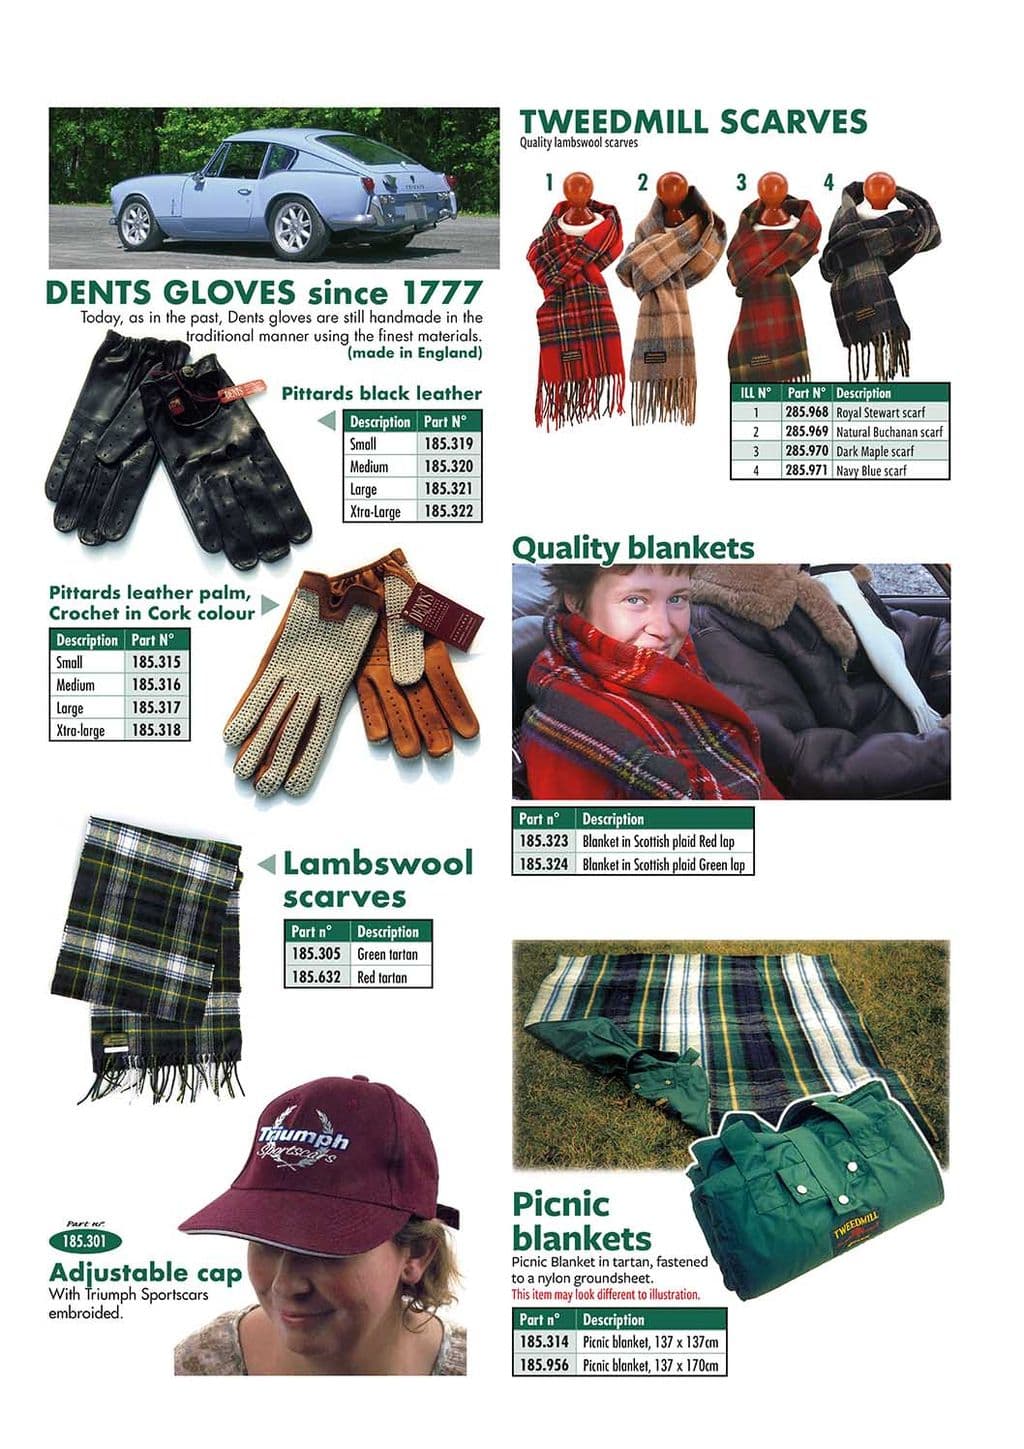 Drivers accessories - Hats & gloves - Books & Driver accessories - MGC 1967-1969 - Drivers accessories - 1